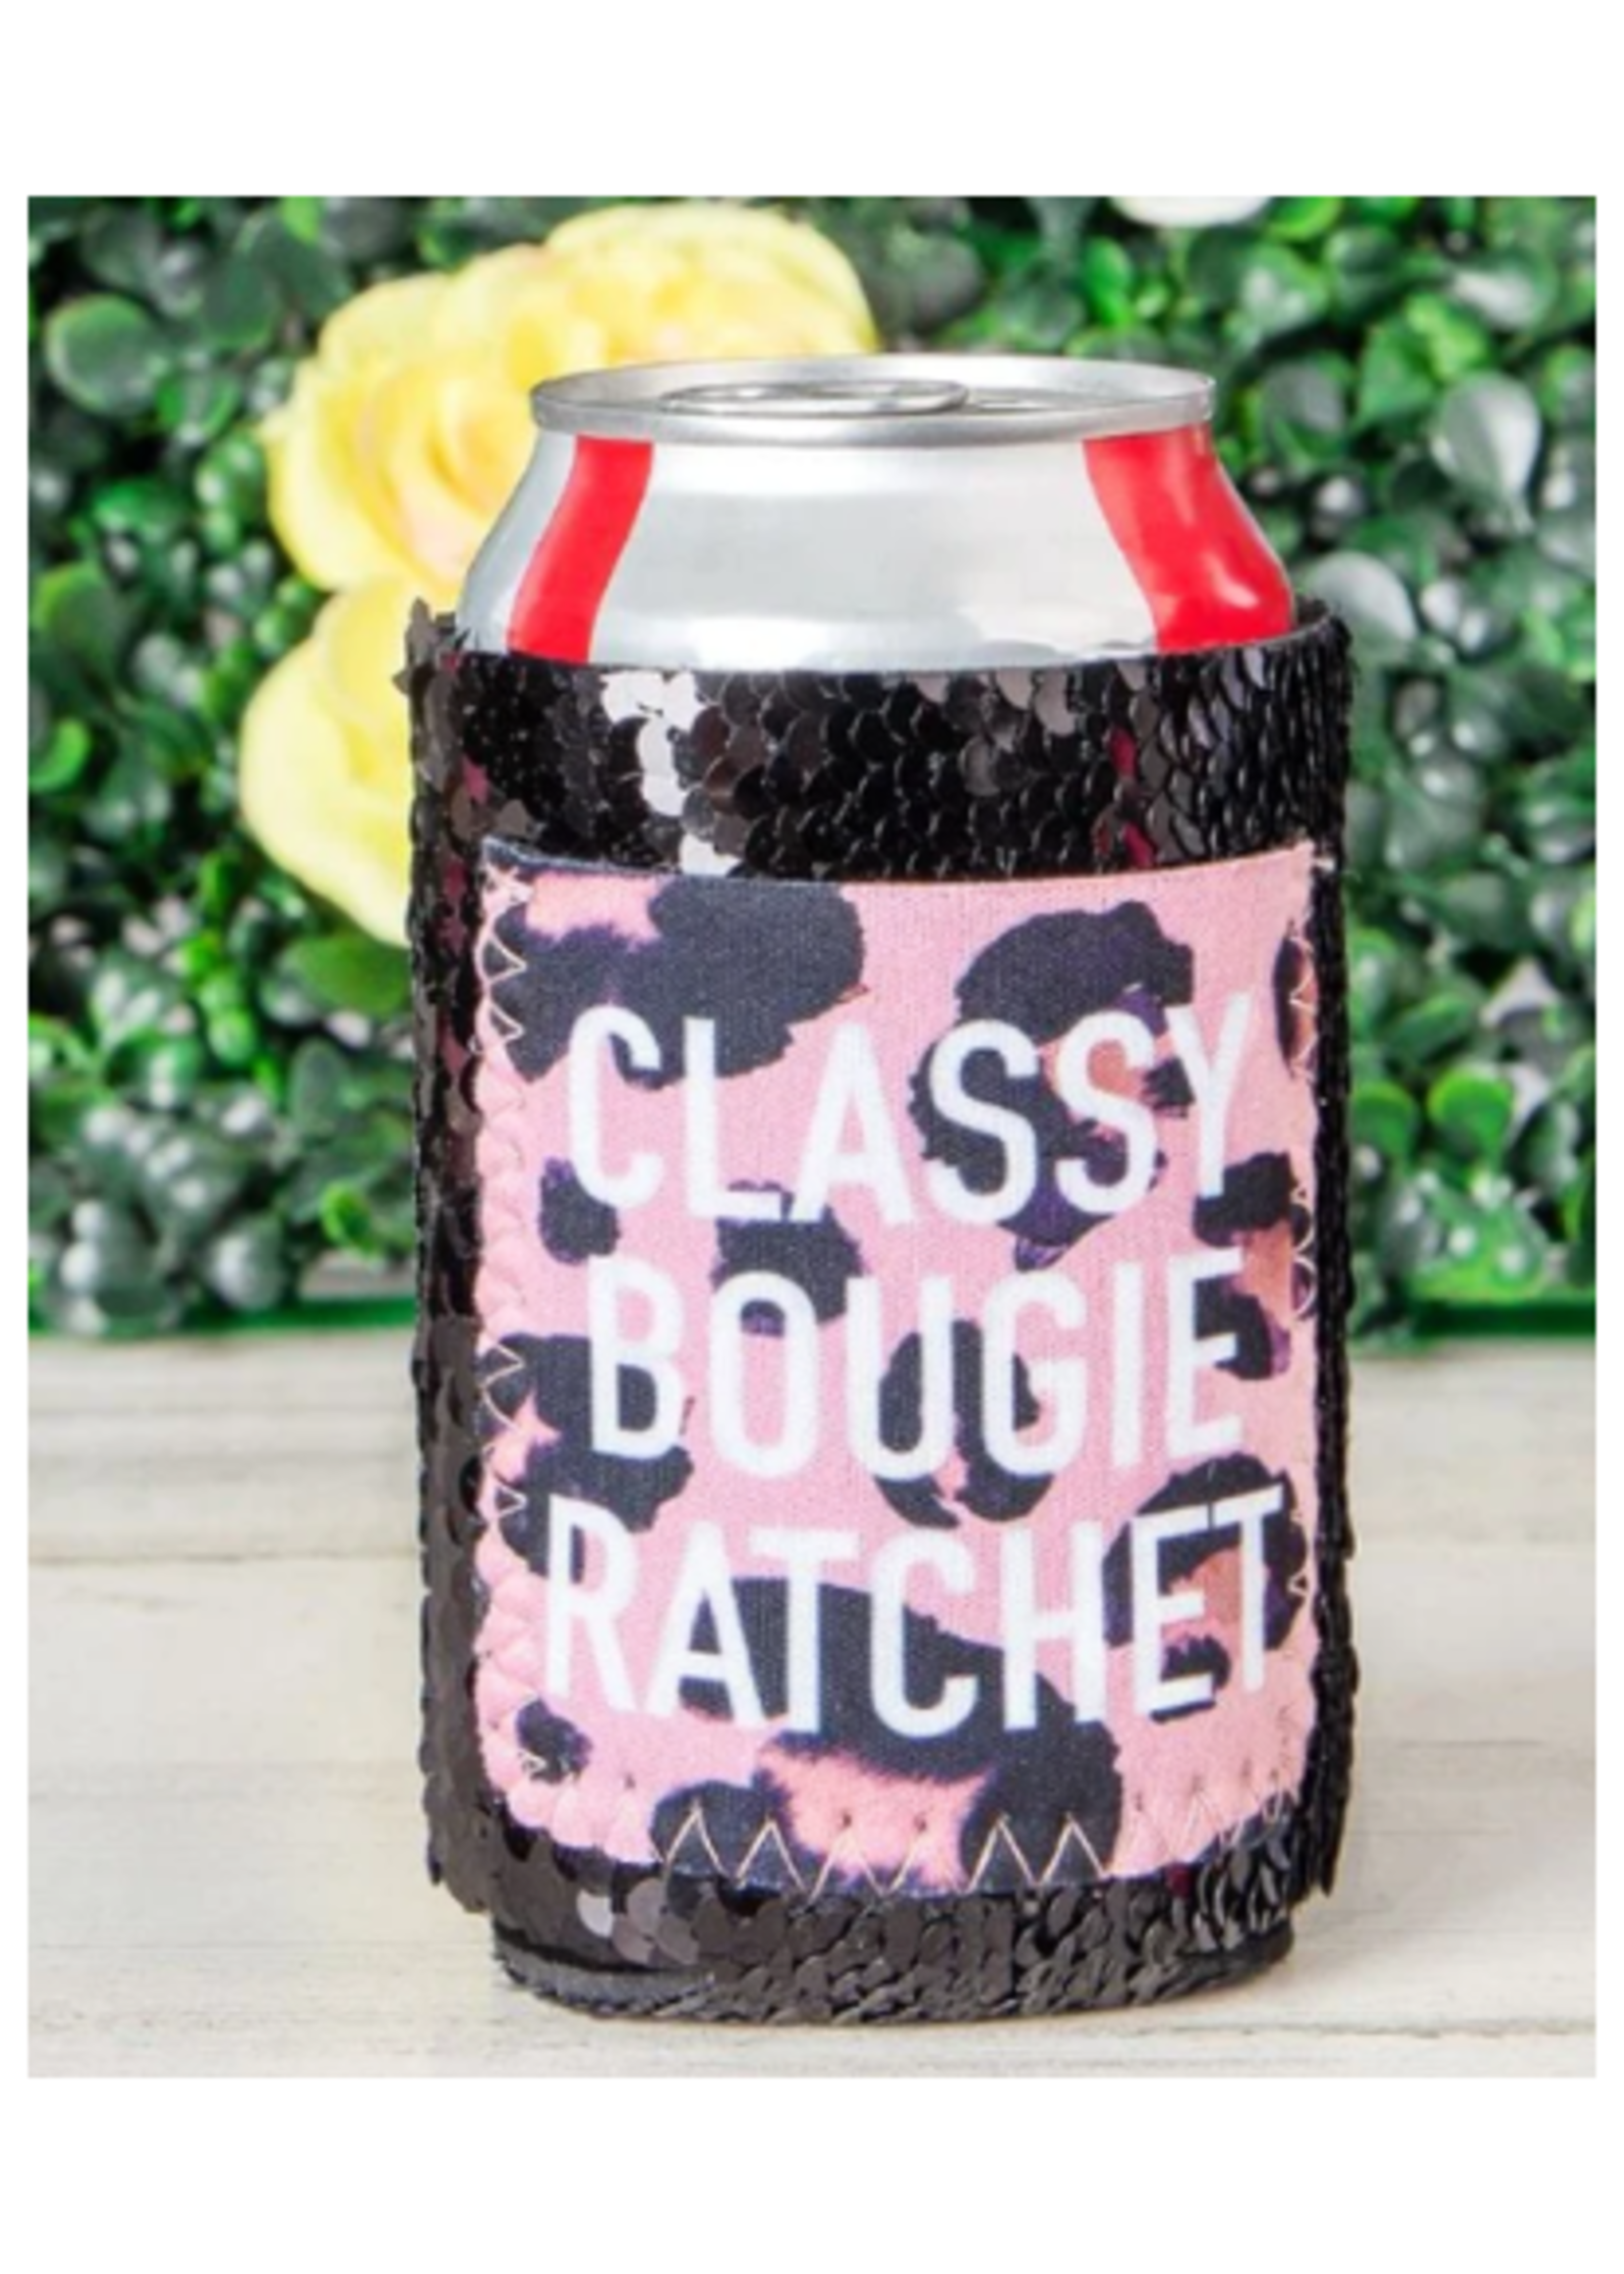 Classy Bougie Ratchet Can Cooler